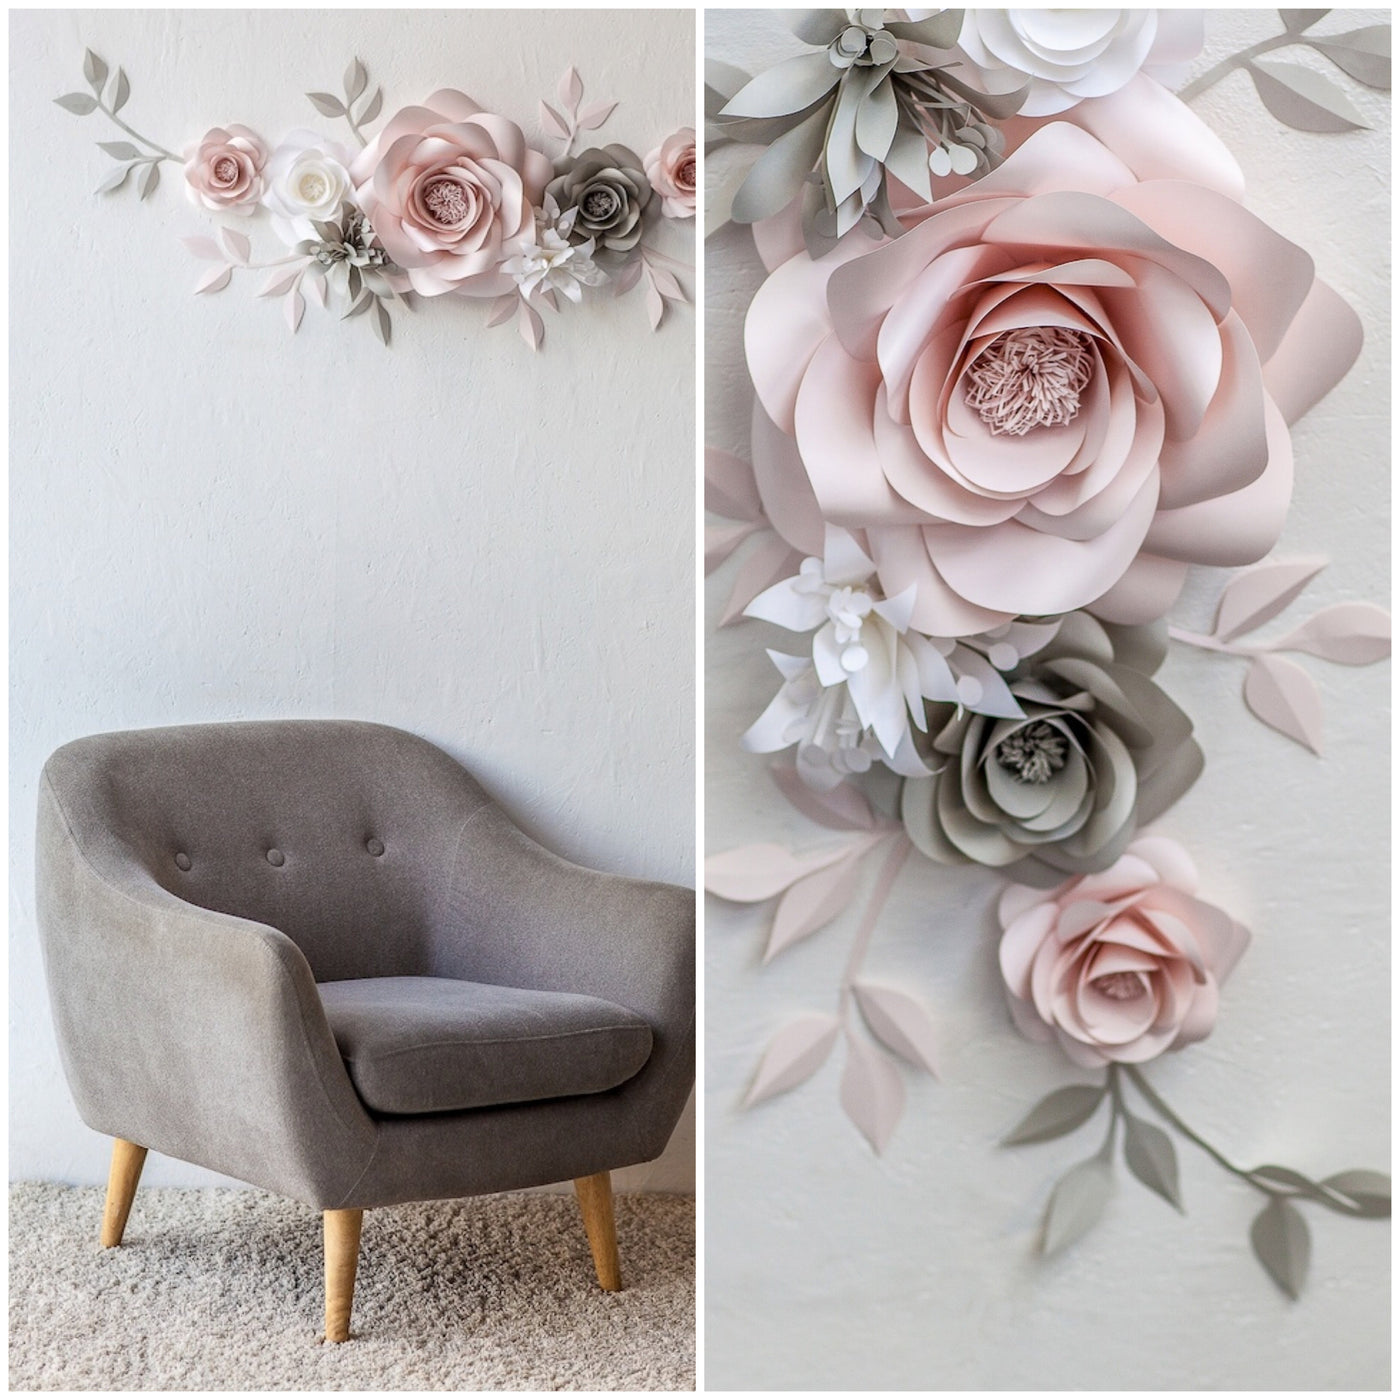 Create a blissful nursery with our enchanting Blush, White, and Light Grey wallpaper flowers